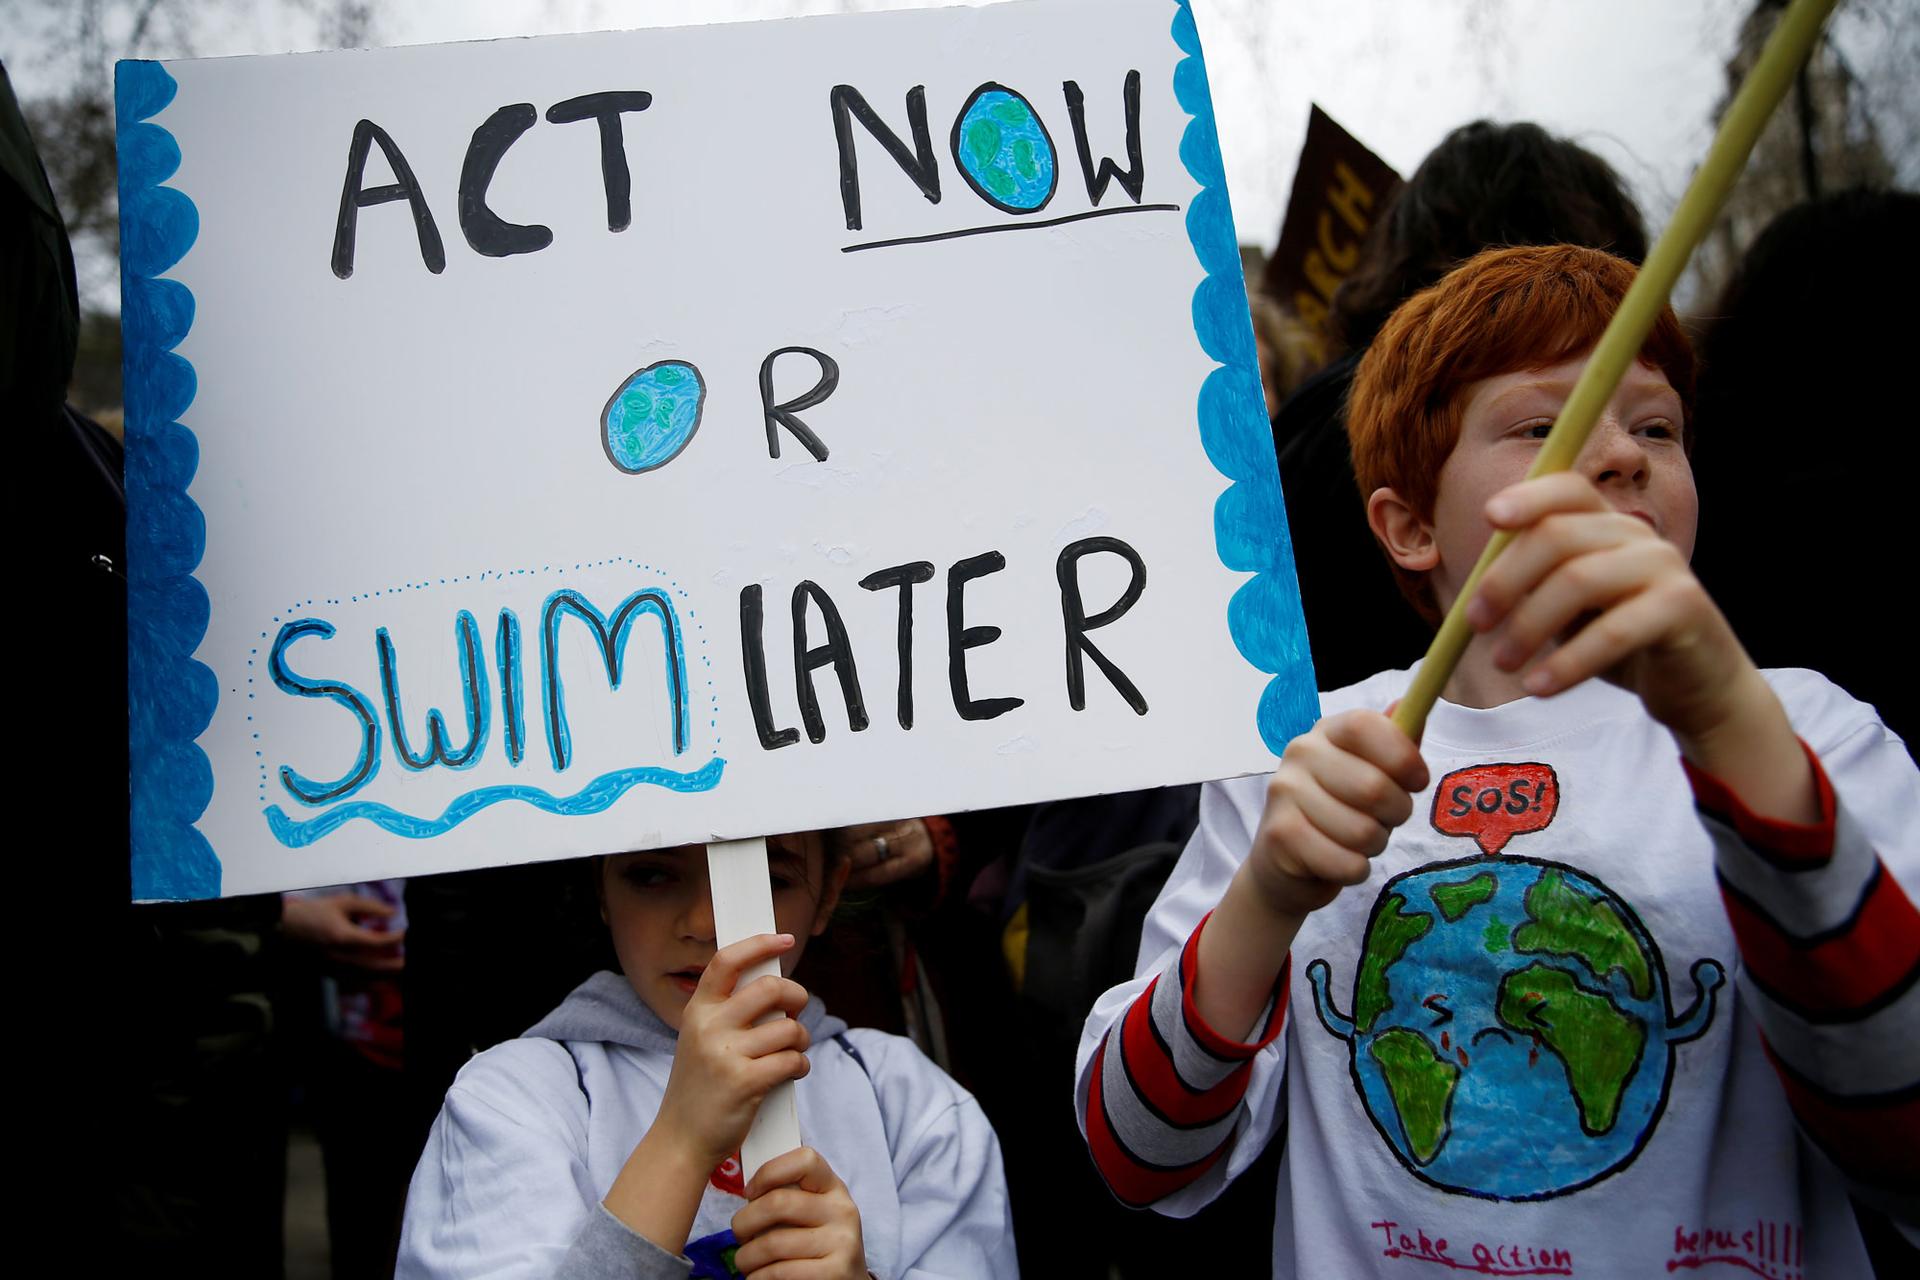 Two children are shown protesting against climate change with a sign that reads: 